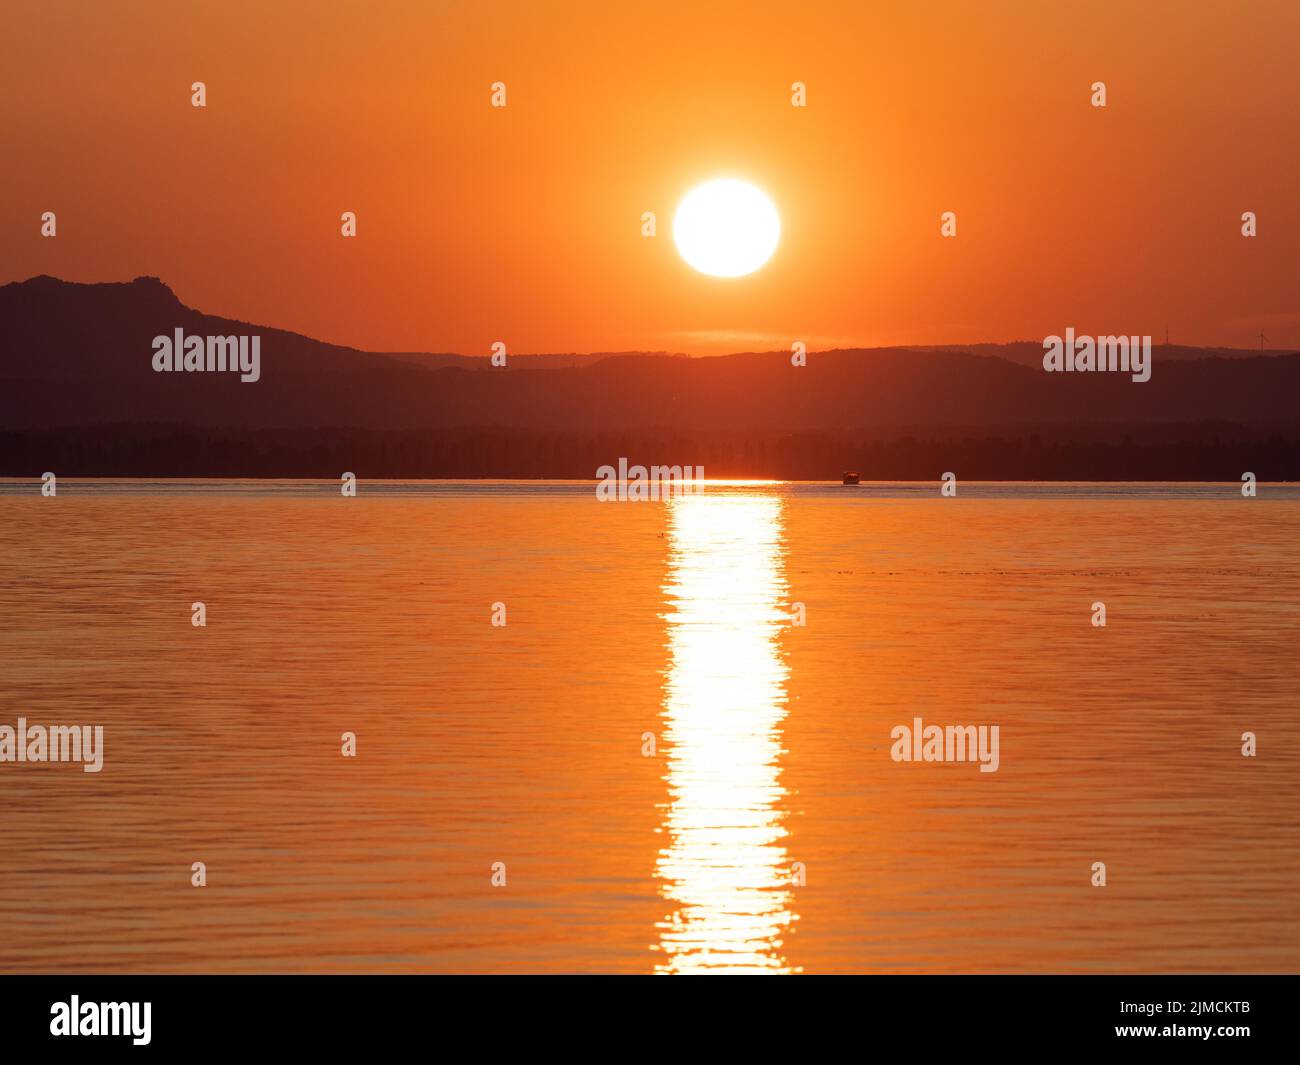 Sunset at the Reichenau, Lake Constance, Baden-Württemberg, Germany, Europe Stock Photo